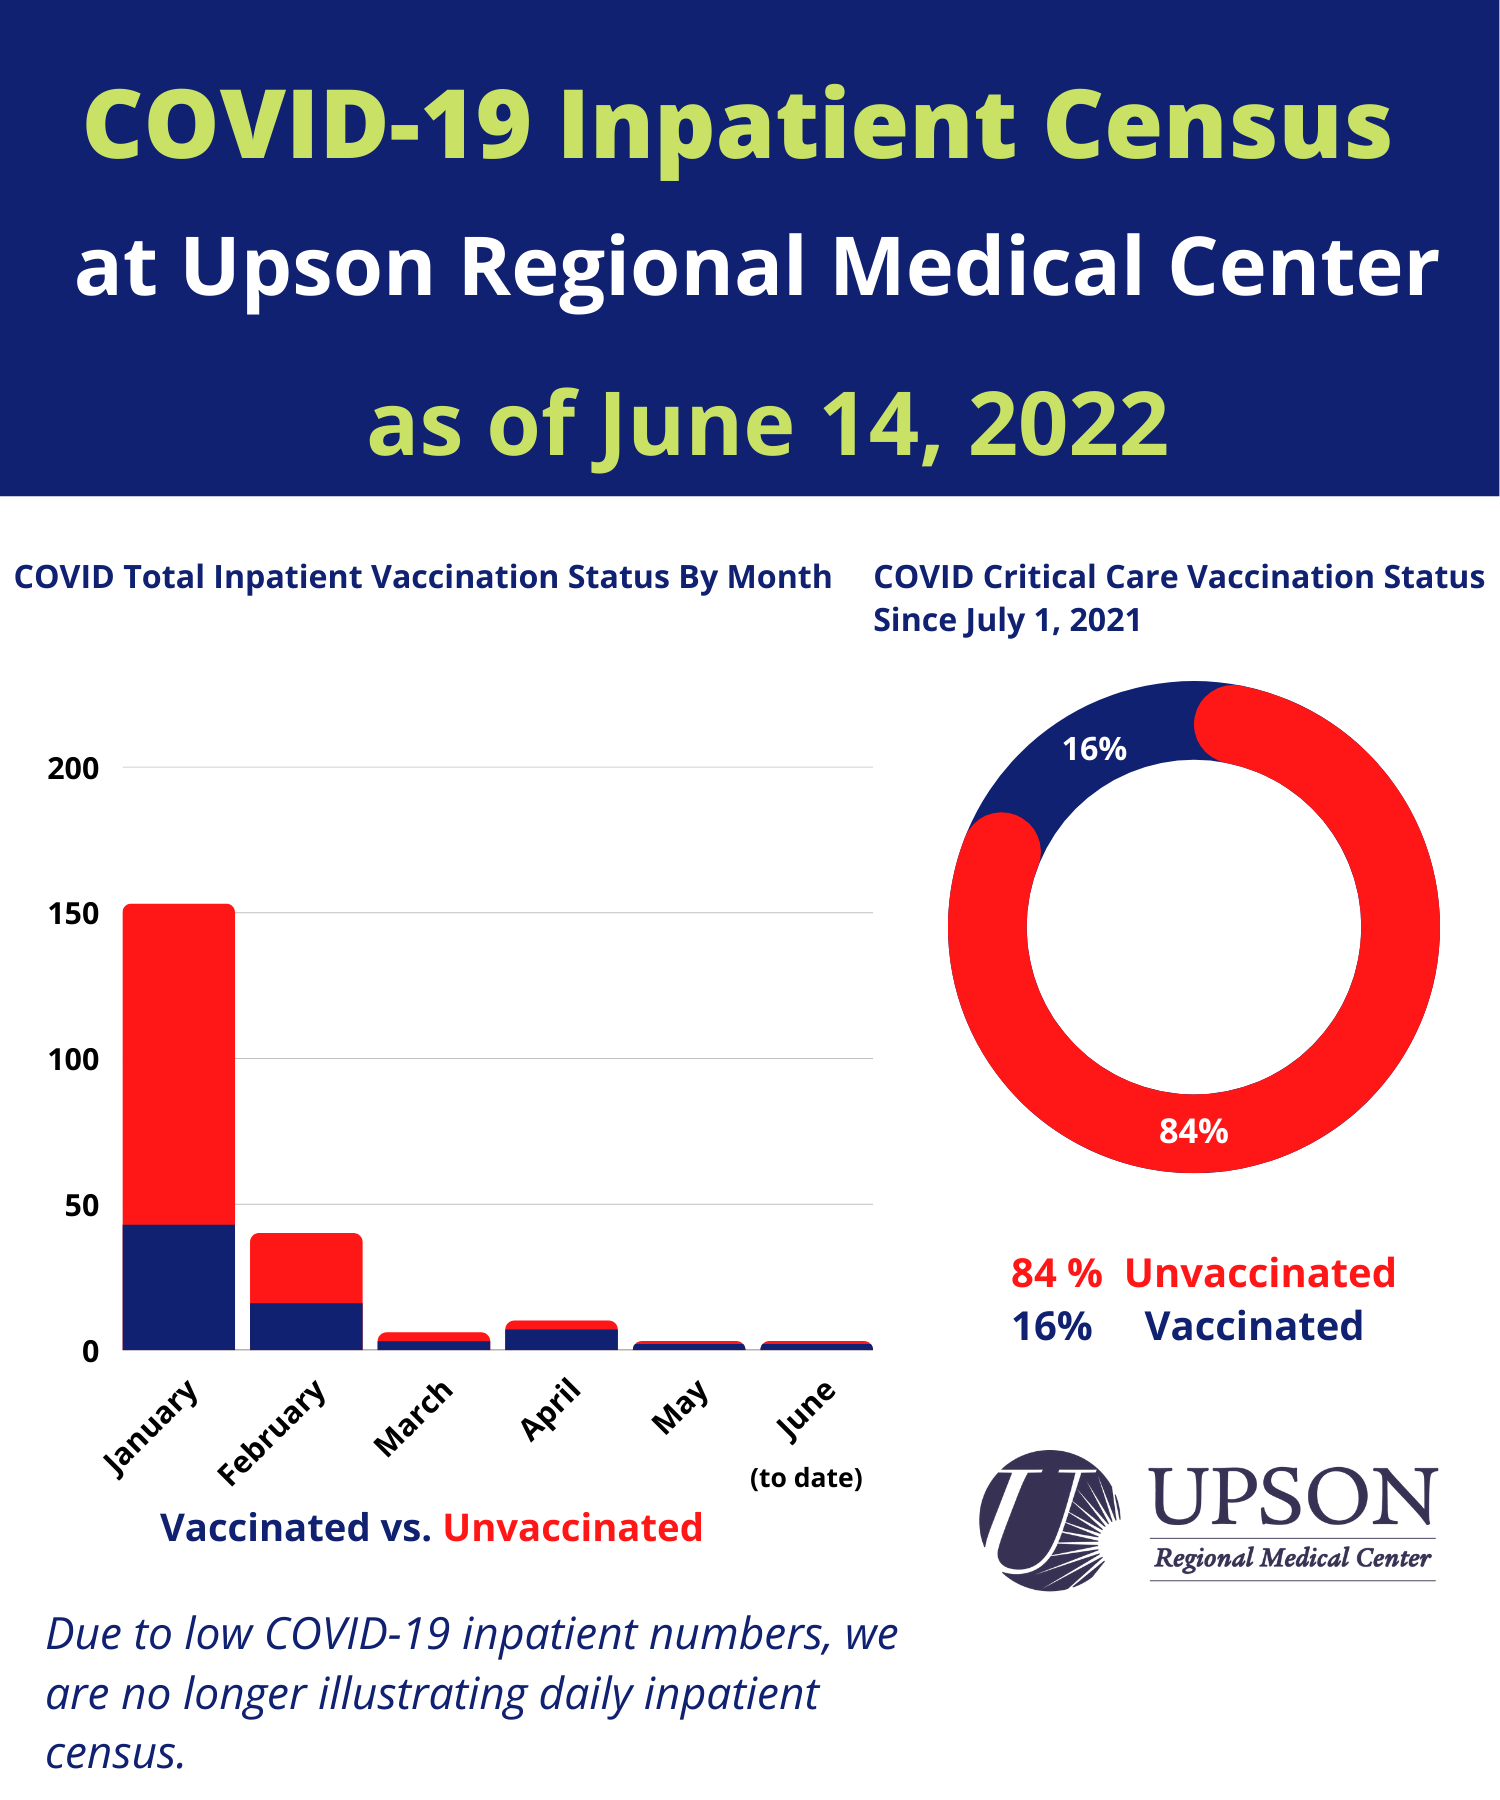 Photo for URMC COVID Inpatients as of June 14, 2022